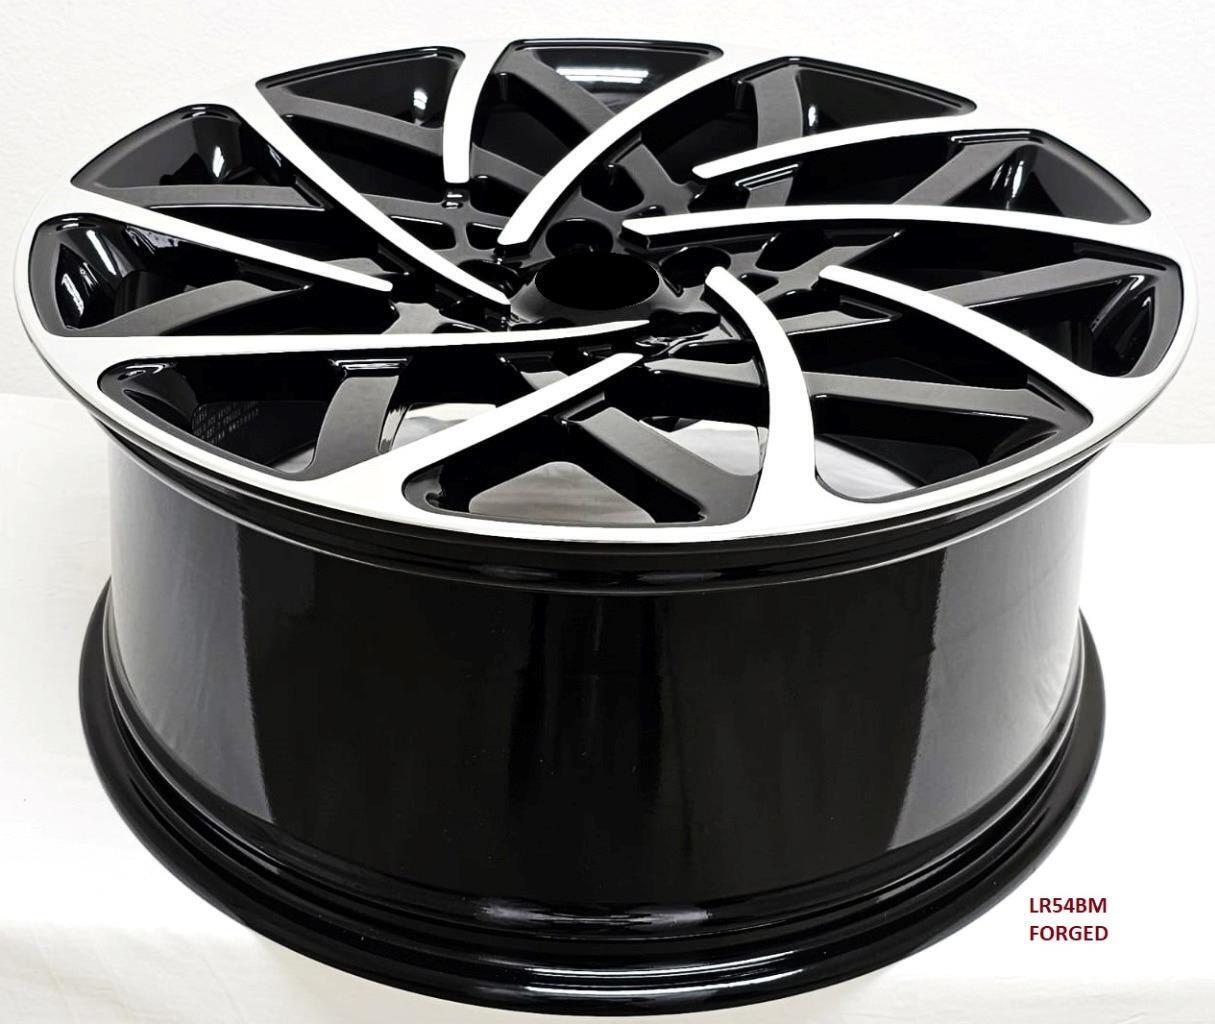 22" FORGED wheels for LAND ROVER DEFENDER 90 5.0L 2021 & UP 22X9.5" 5x120